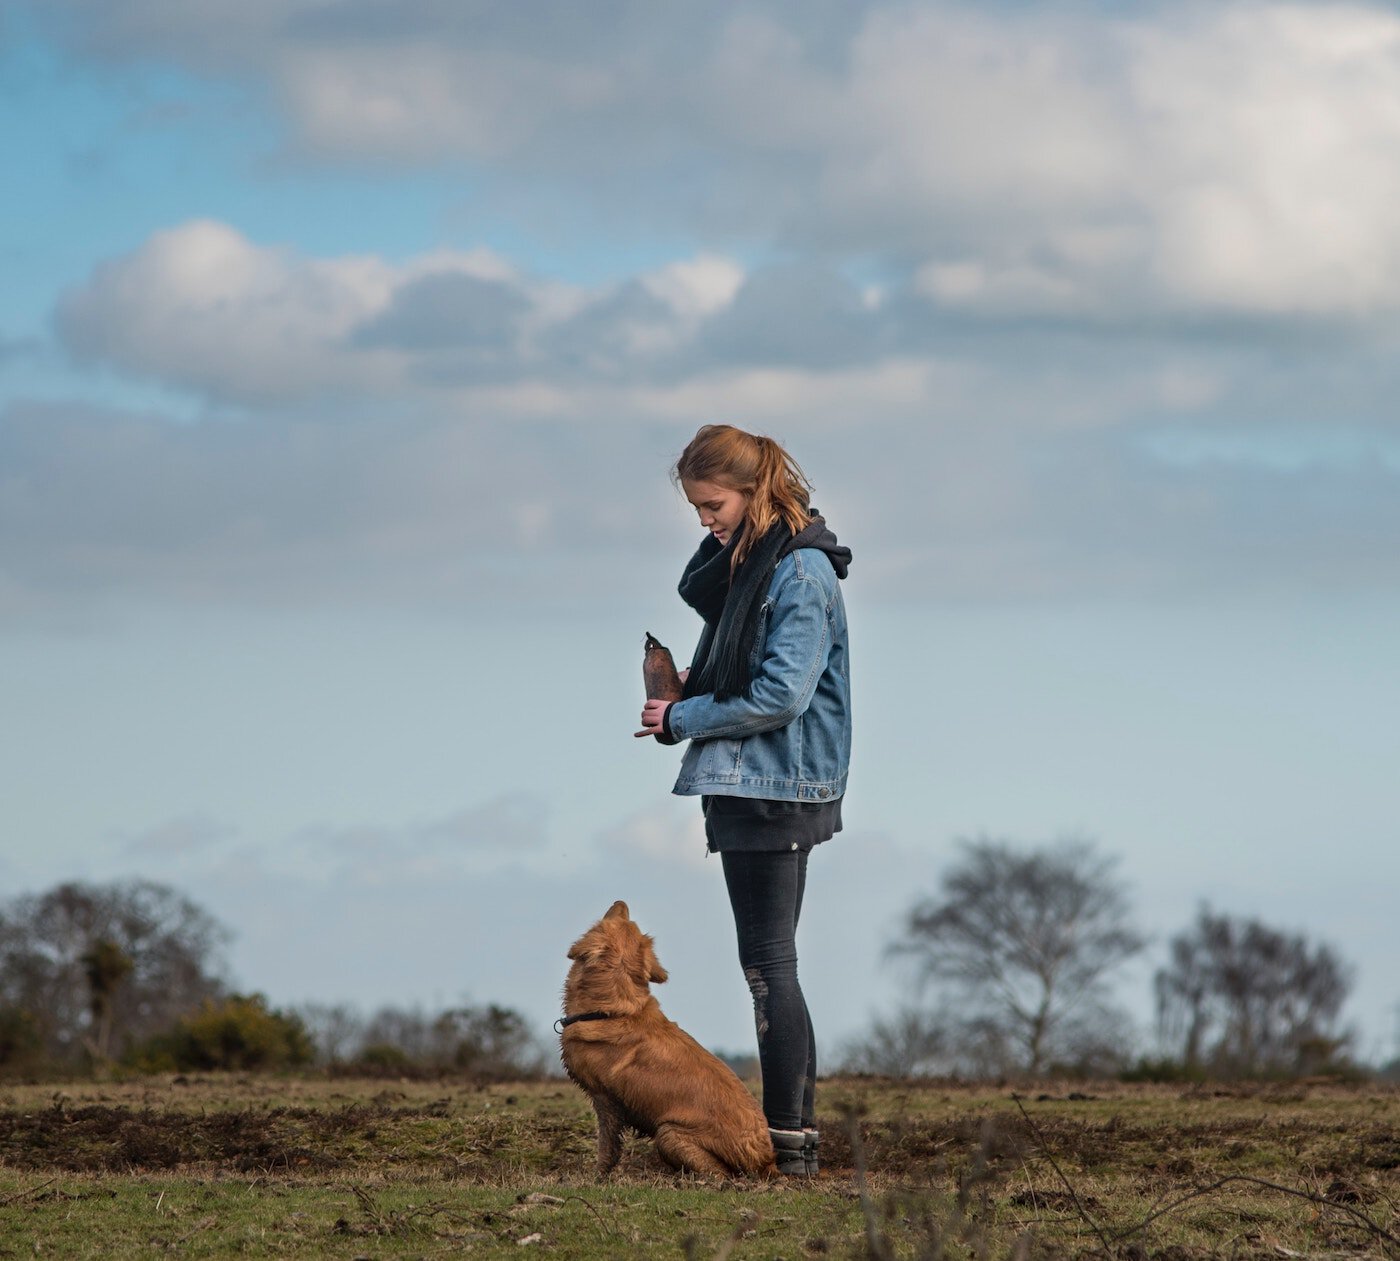 Owner & dog in a field looking at each other